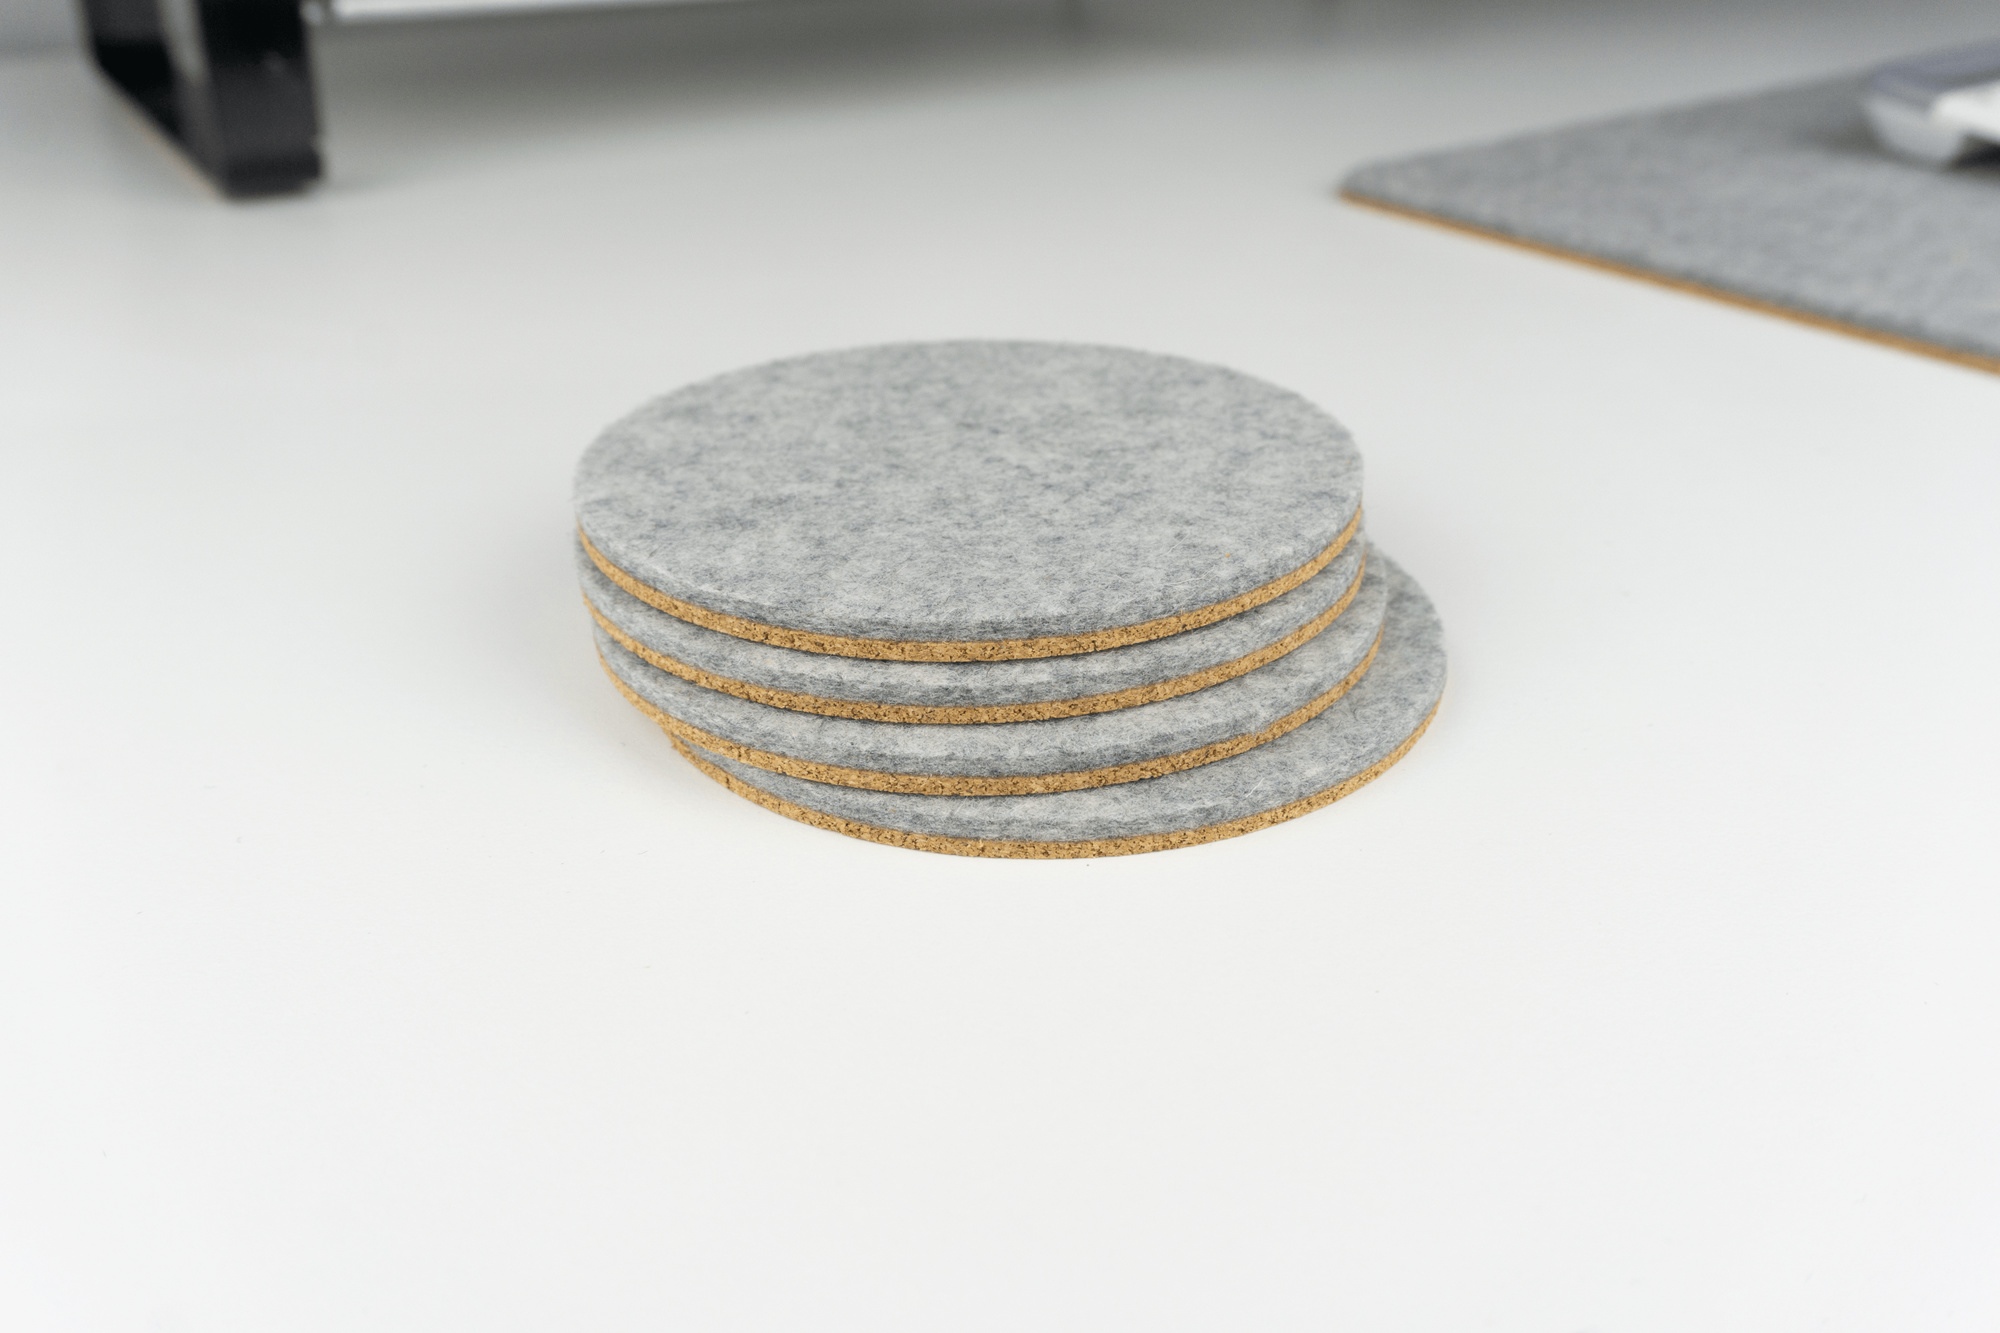 A set of our circle desk coasters shown on a white desk next to a matching grey wool desk mat.